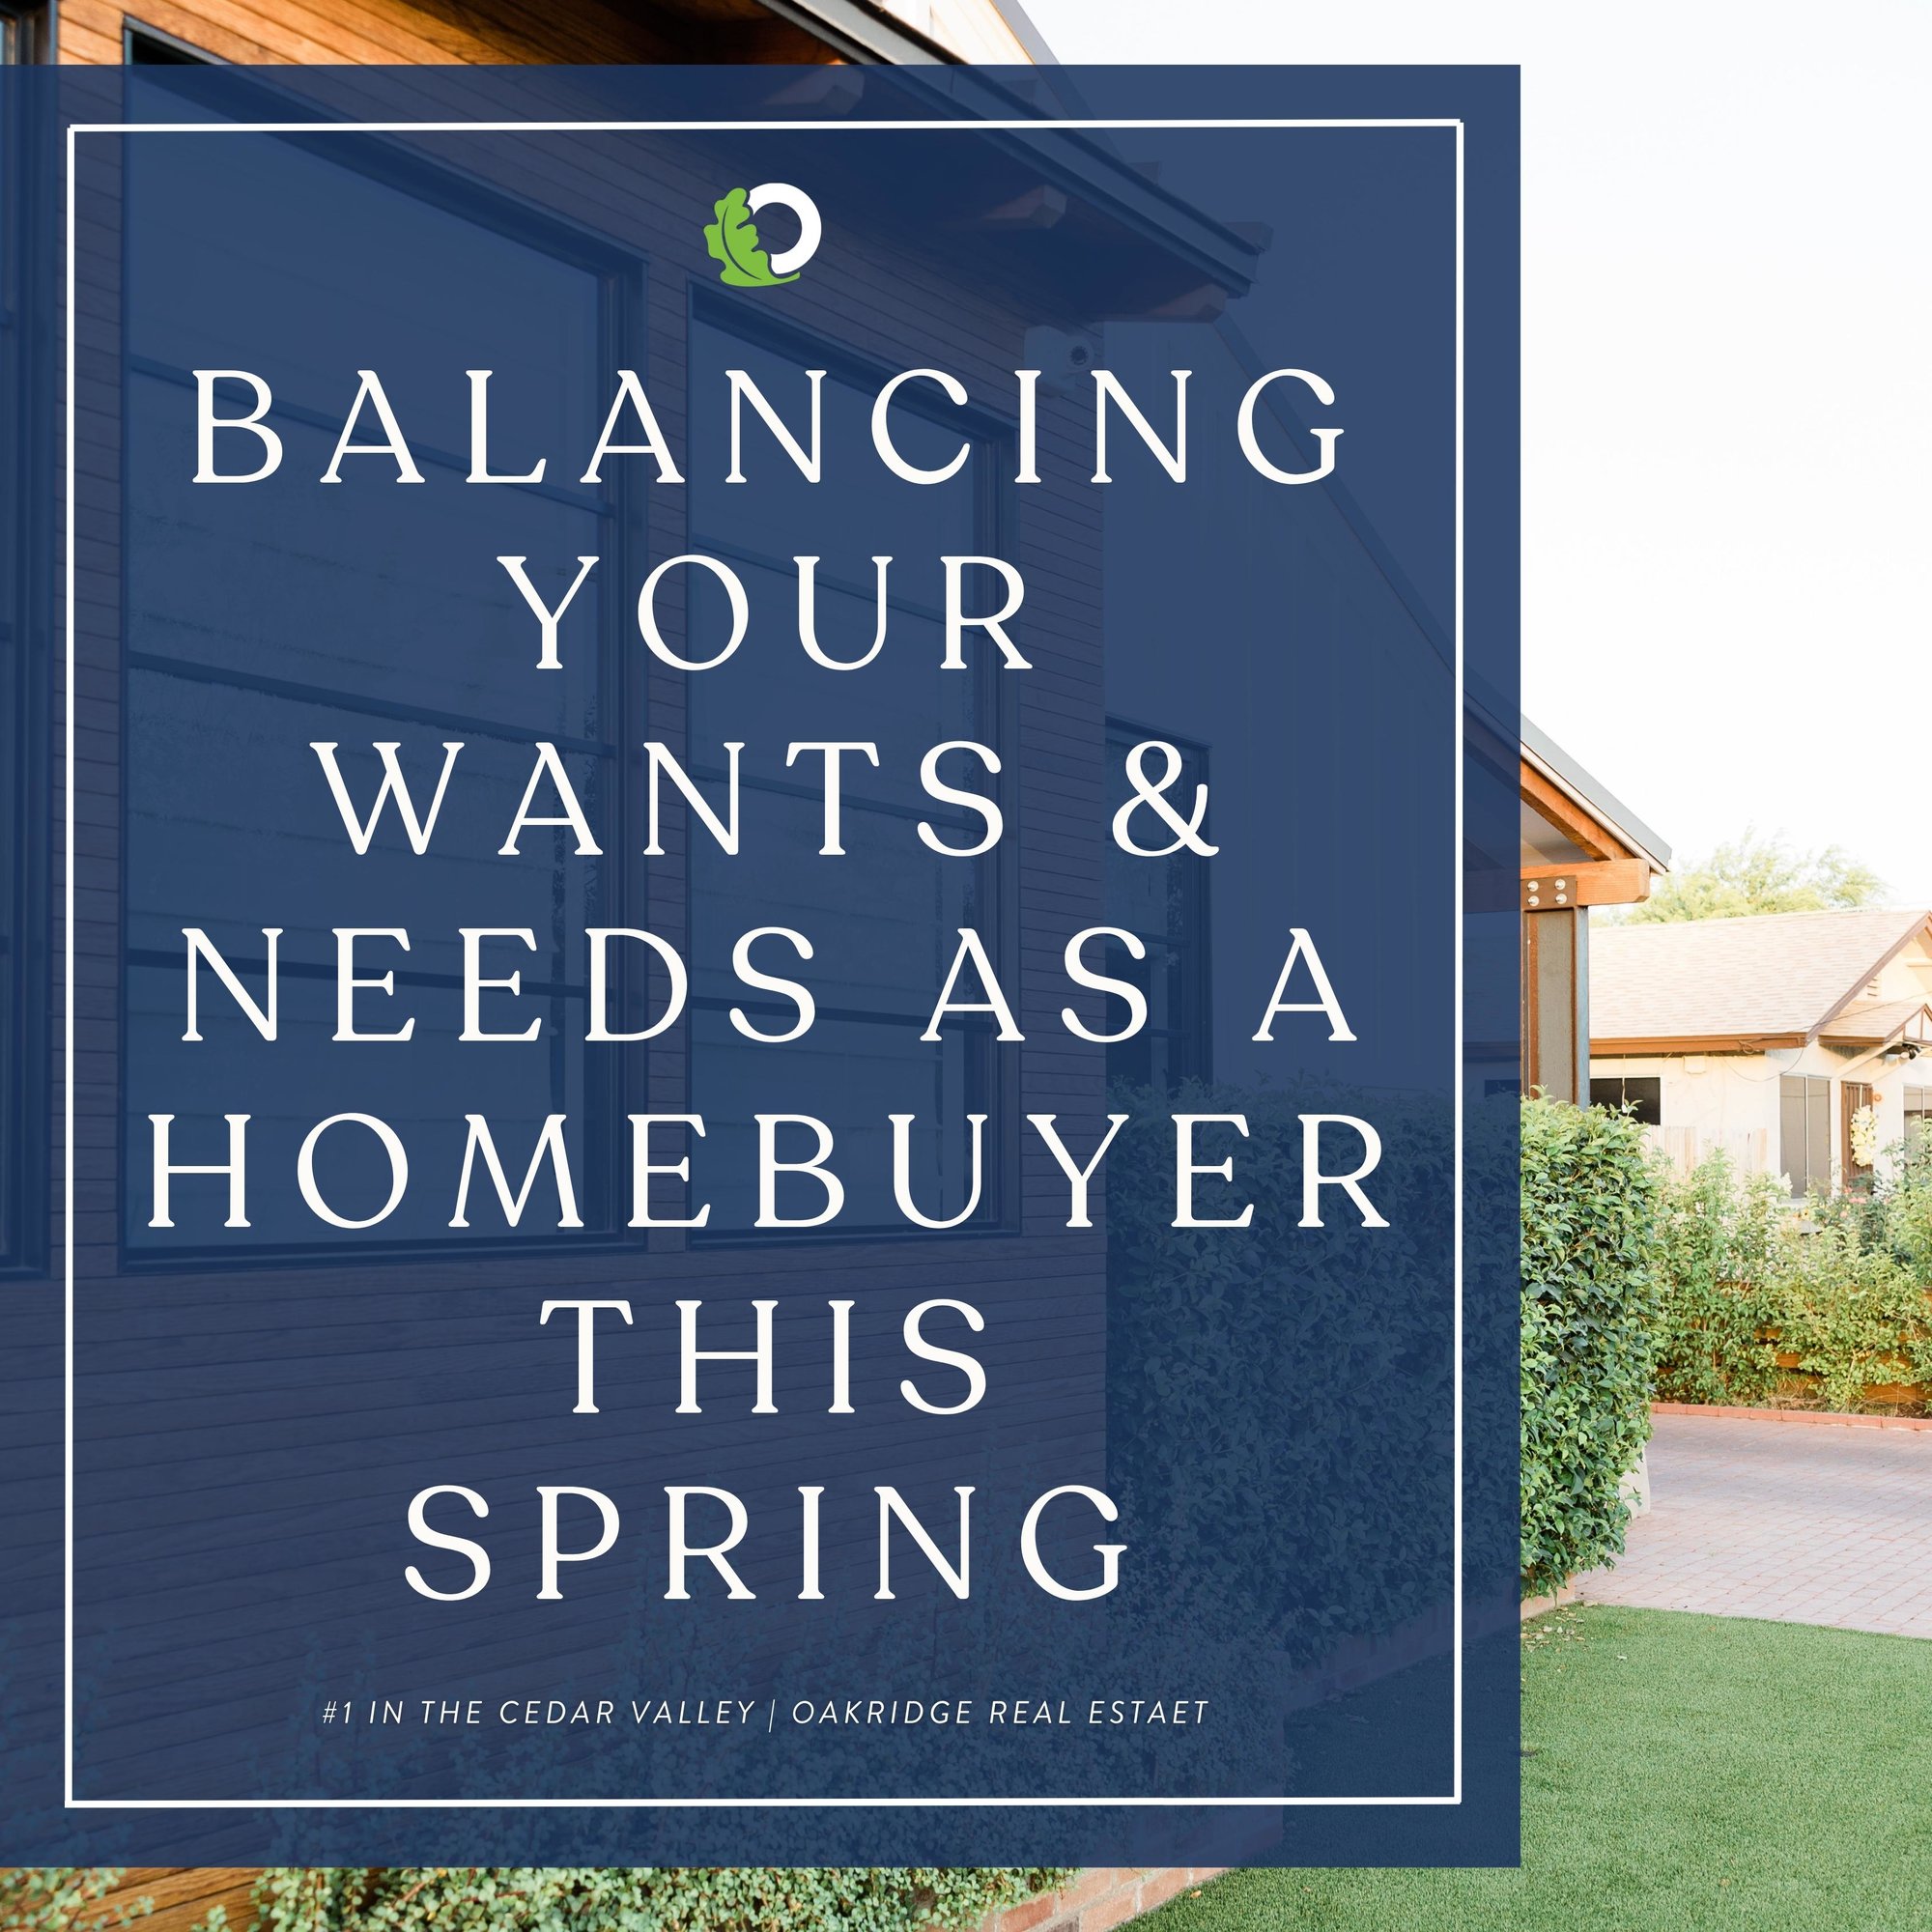 Balancing Your Wants & Needs as a Homebuyer This Spring